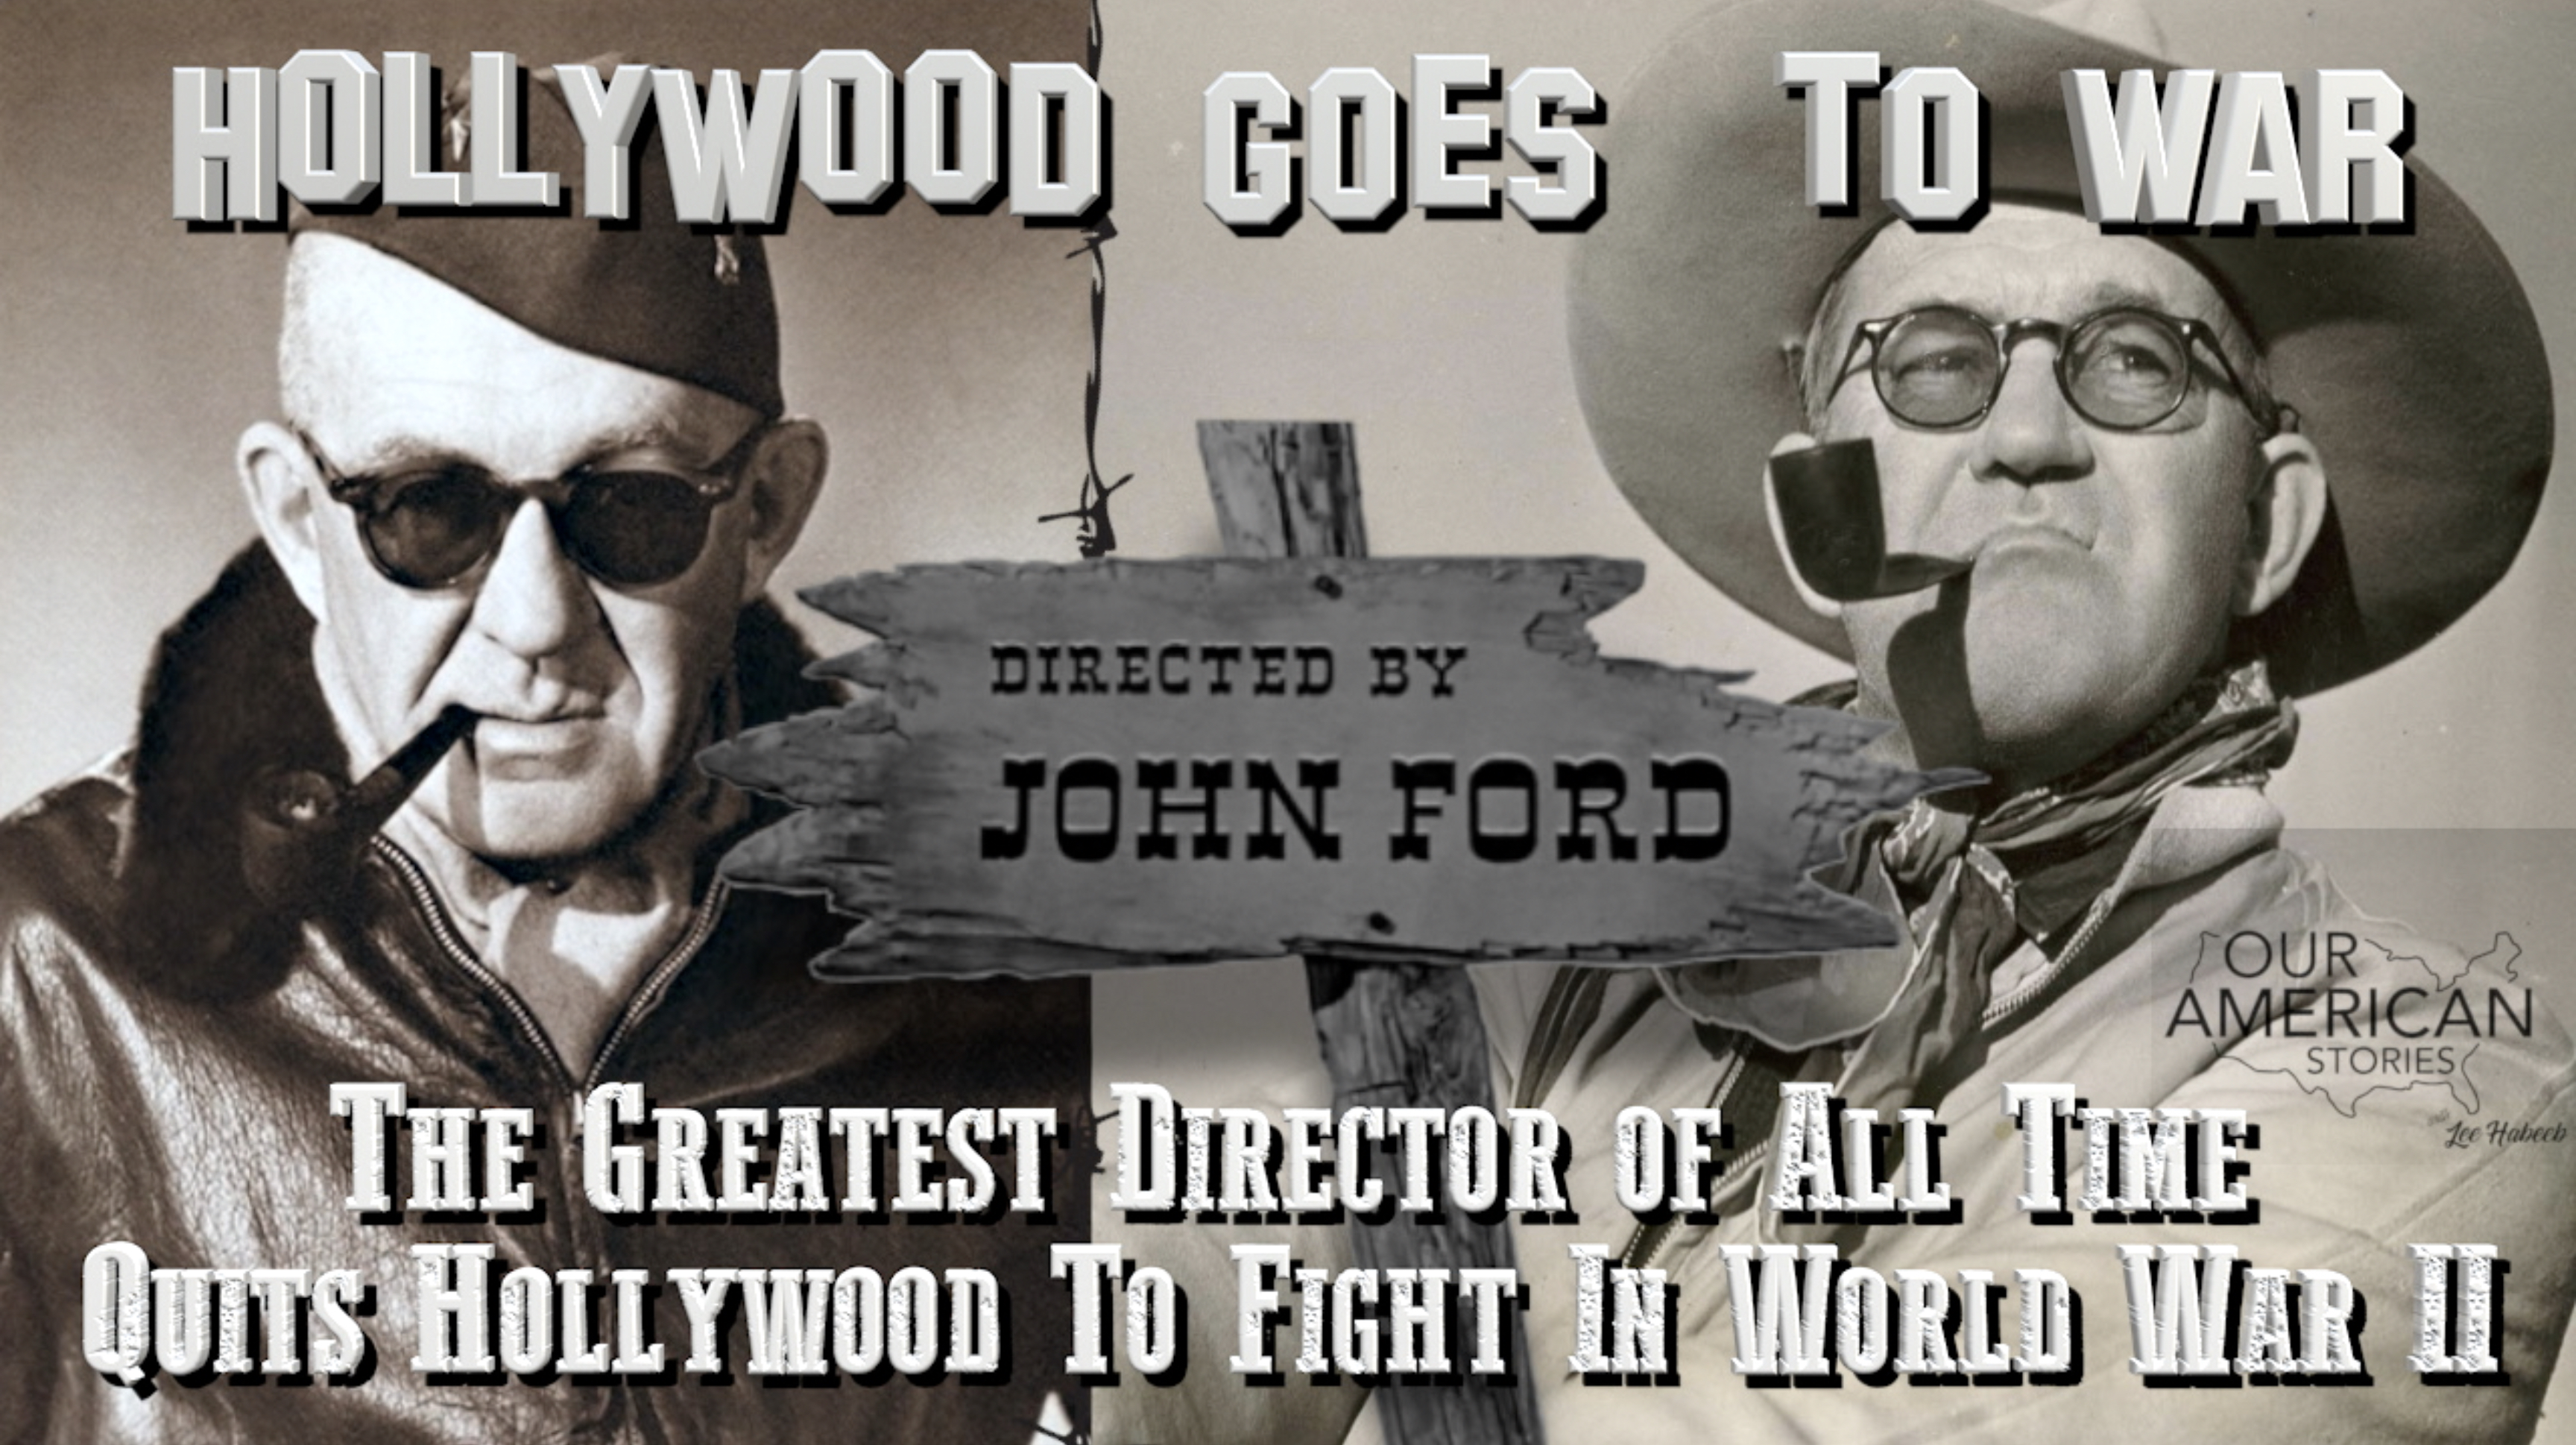 John Ford: The Greatest Director of All Time Quits Hollywood To Fight In World War II (d. 1973)